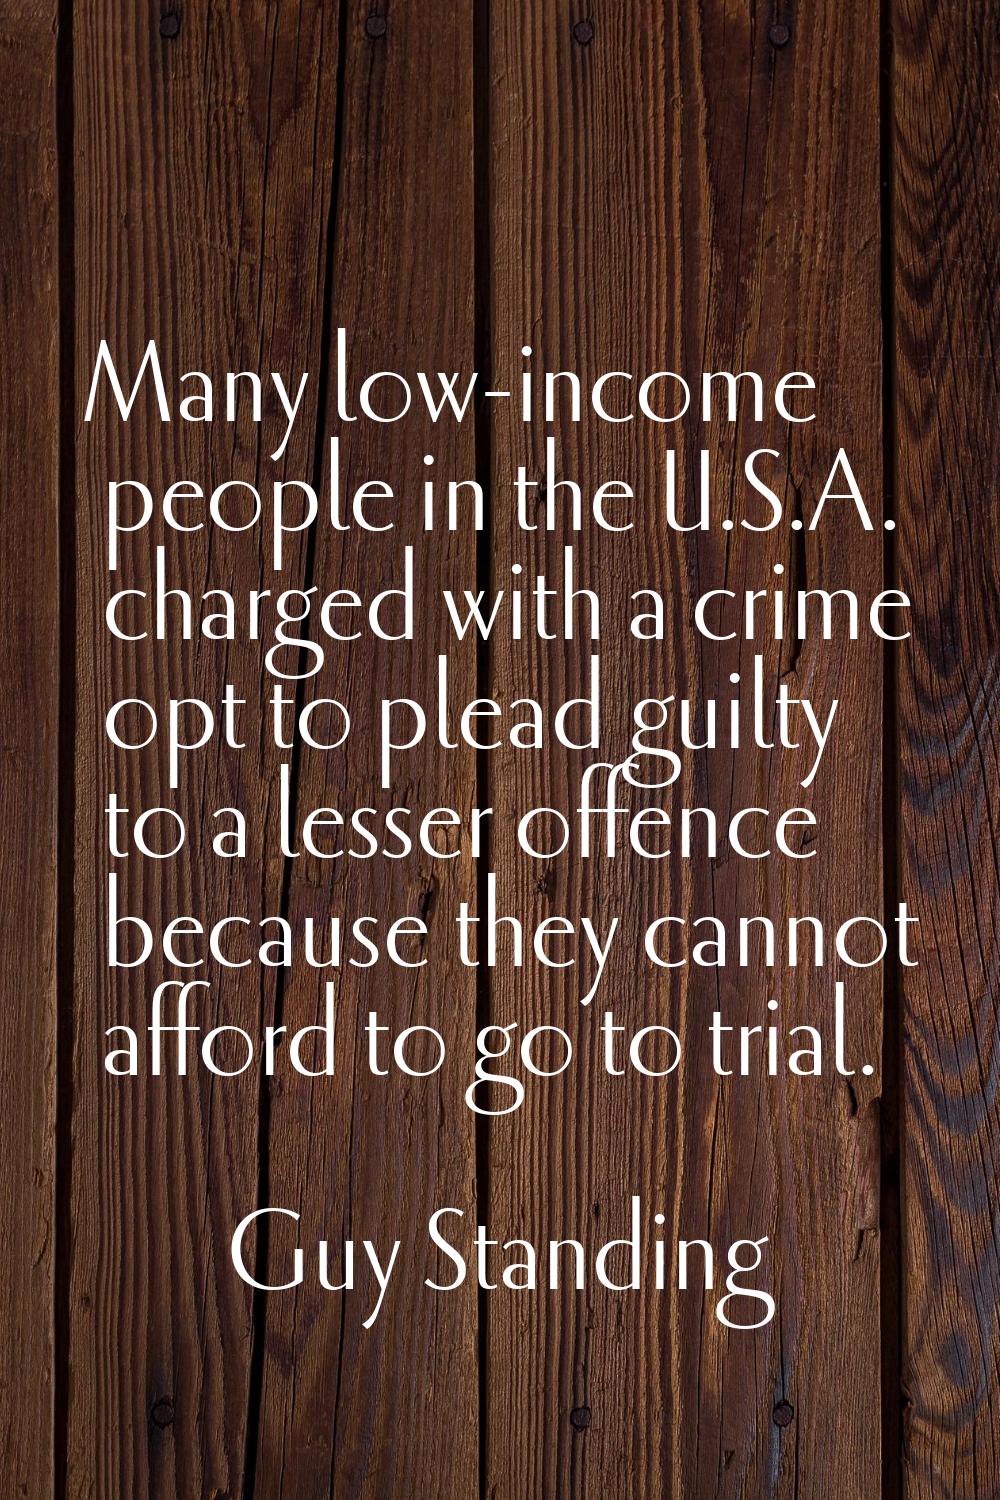 Many low-income people in the U.S.A. charged with a crime opt to plead guilty to a lesser offence b